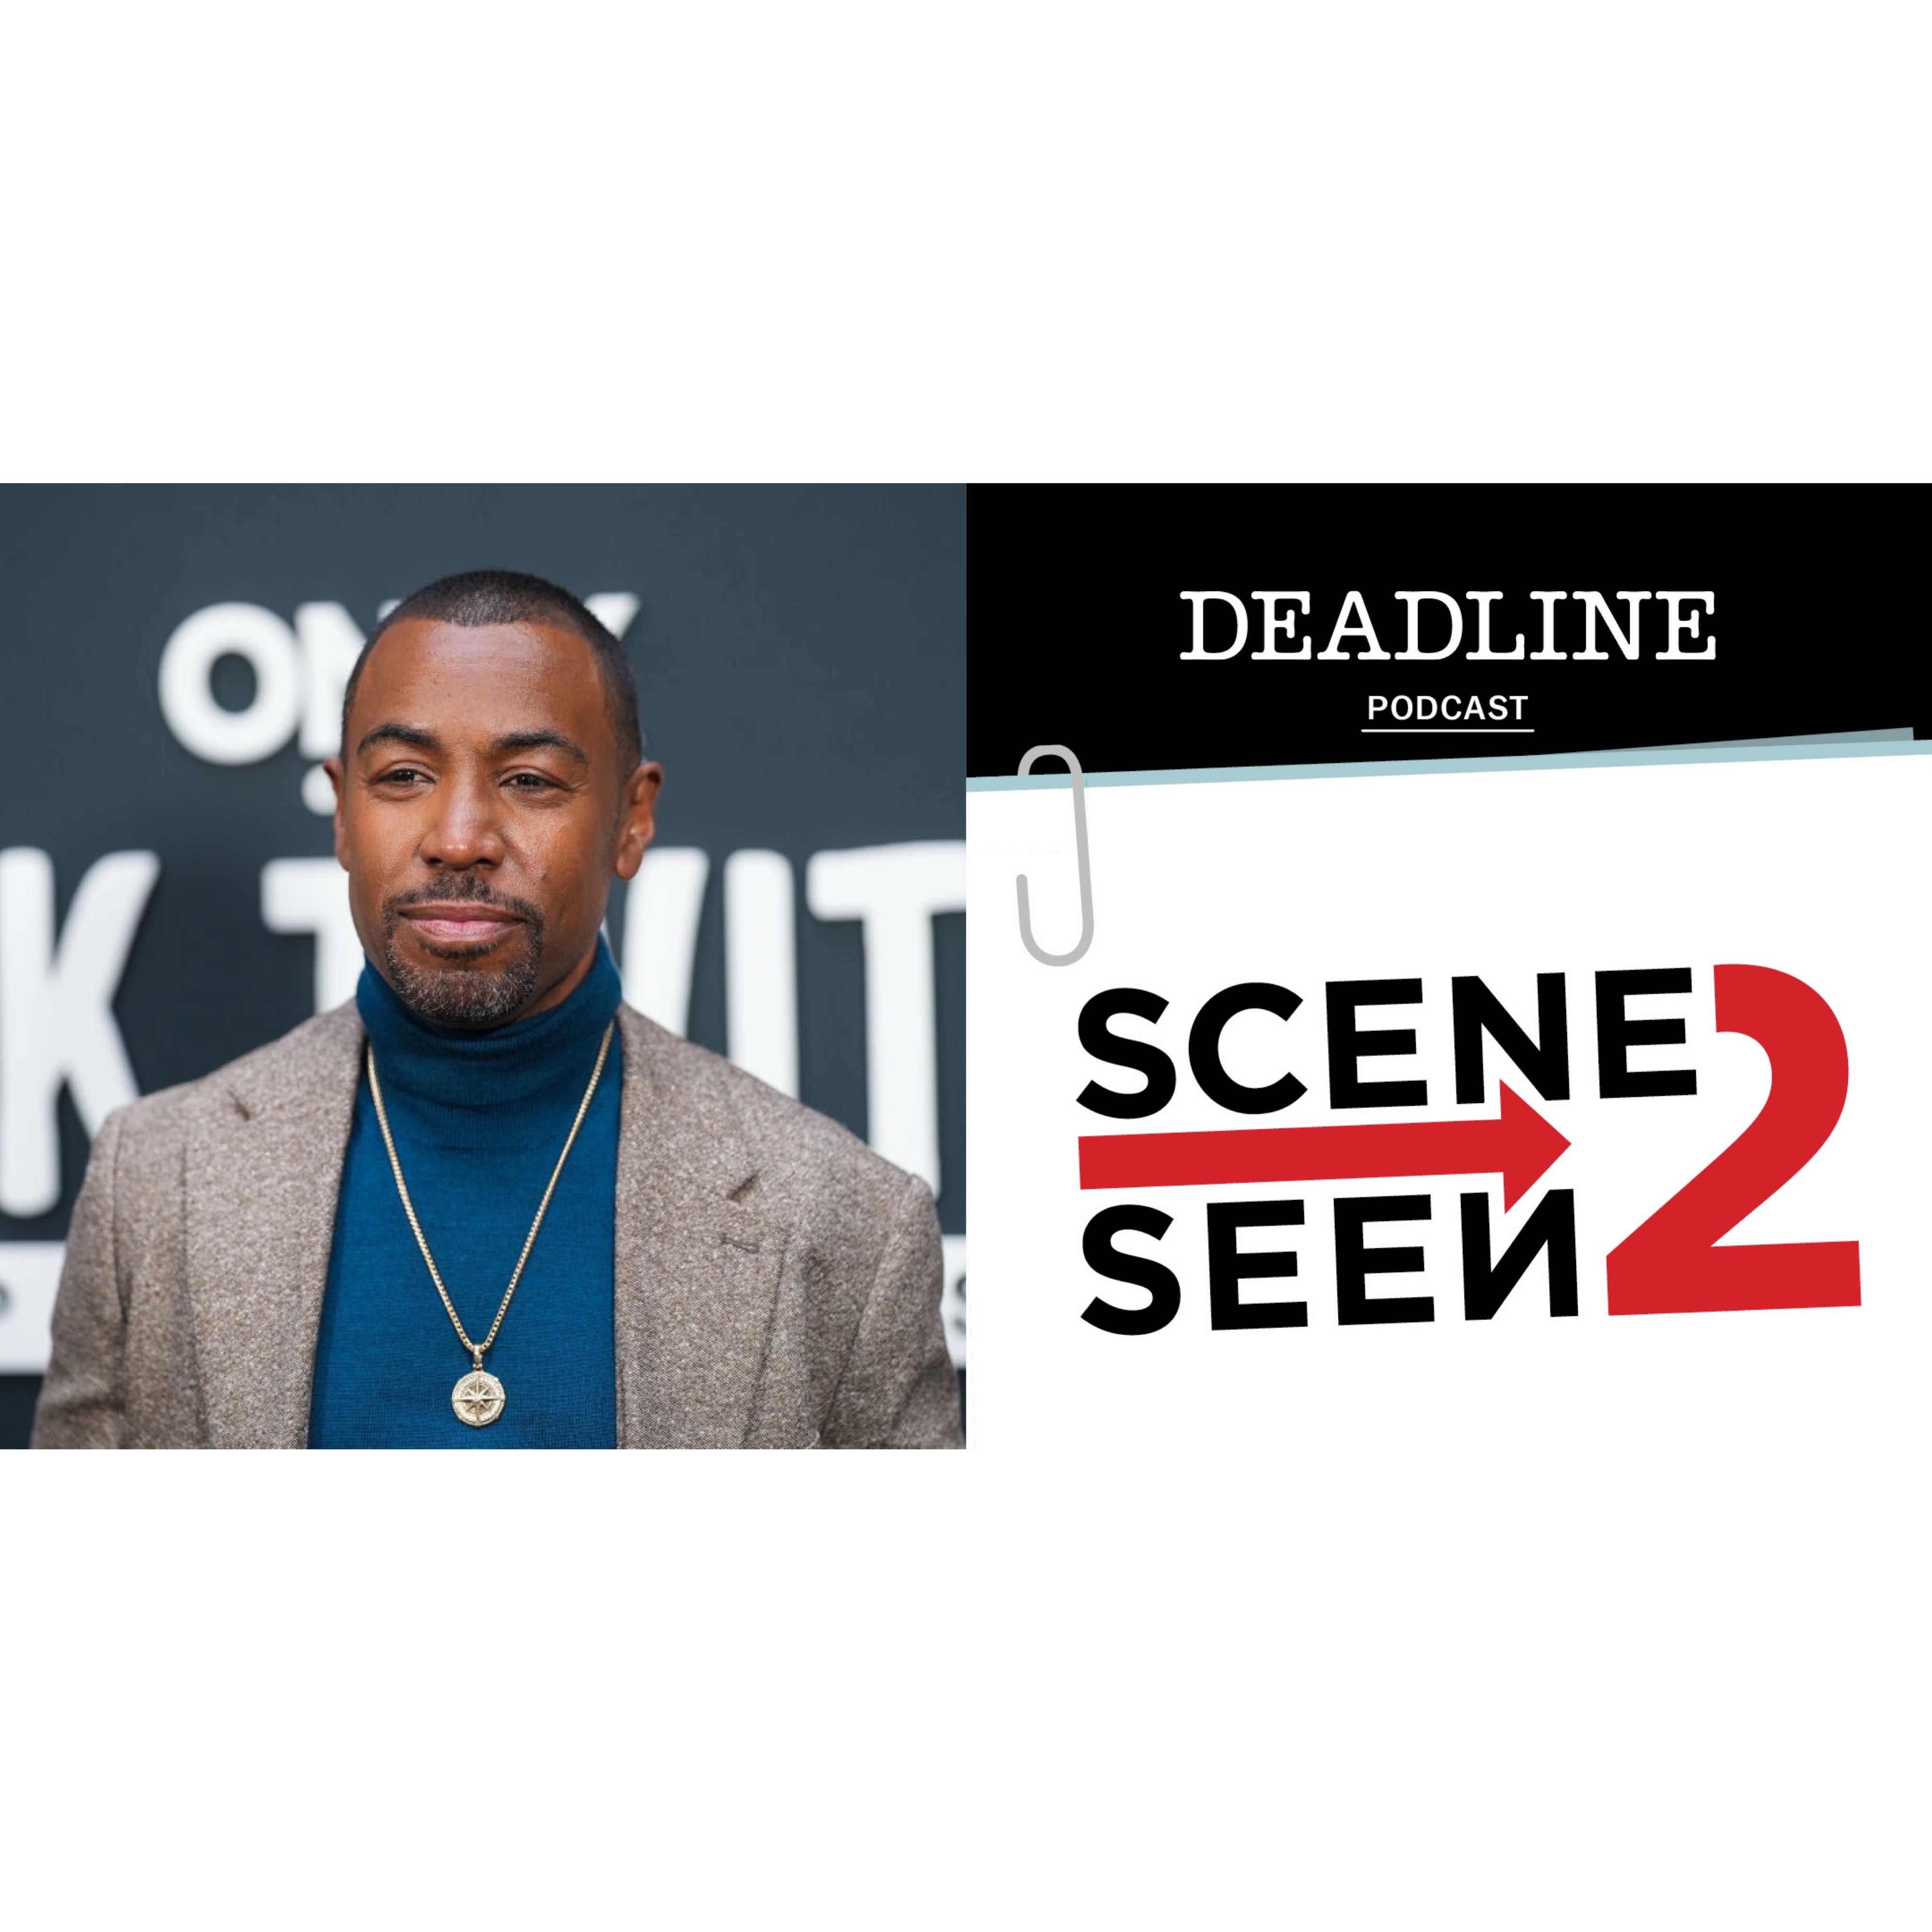 Scene 2 Seen Podcast: Prentice Penny Discusses Black Twitter Docuseries And How Black Twitter Influenced Social Media Platforms